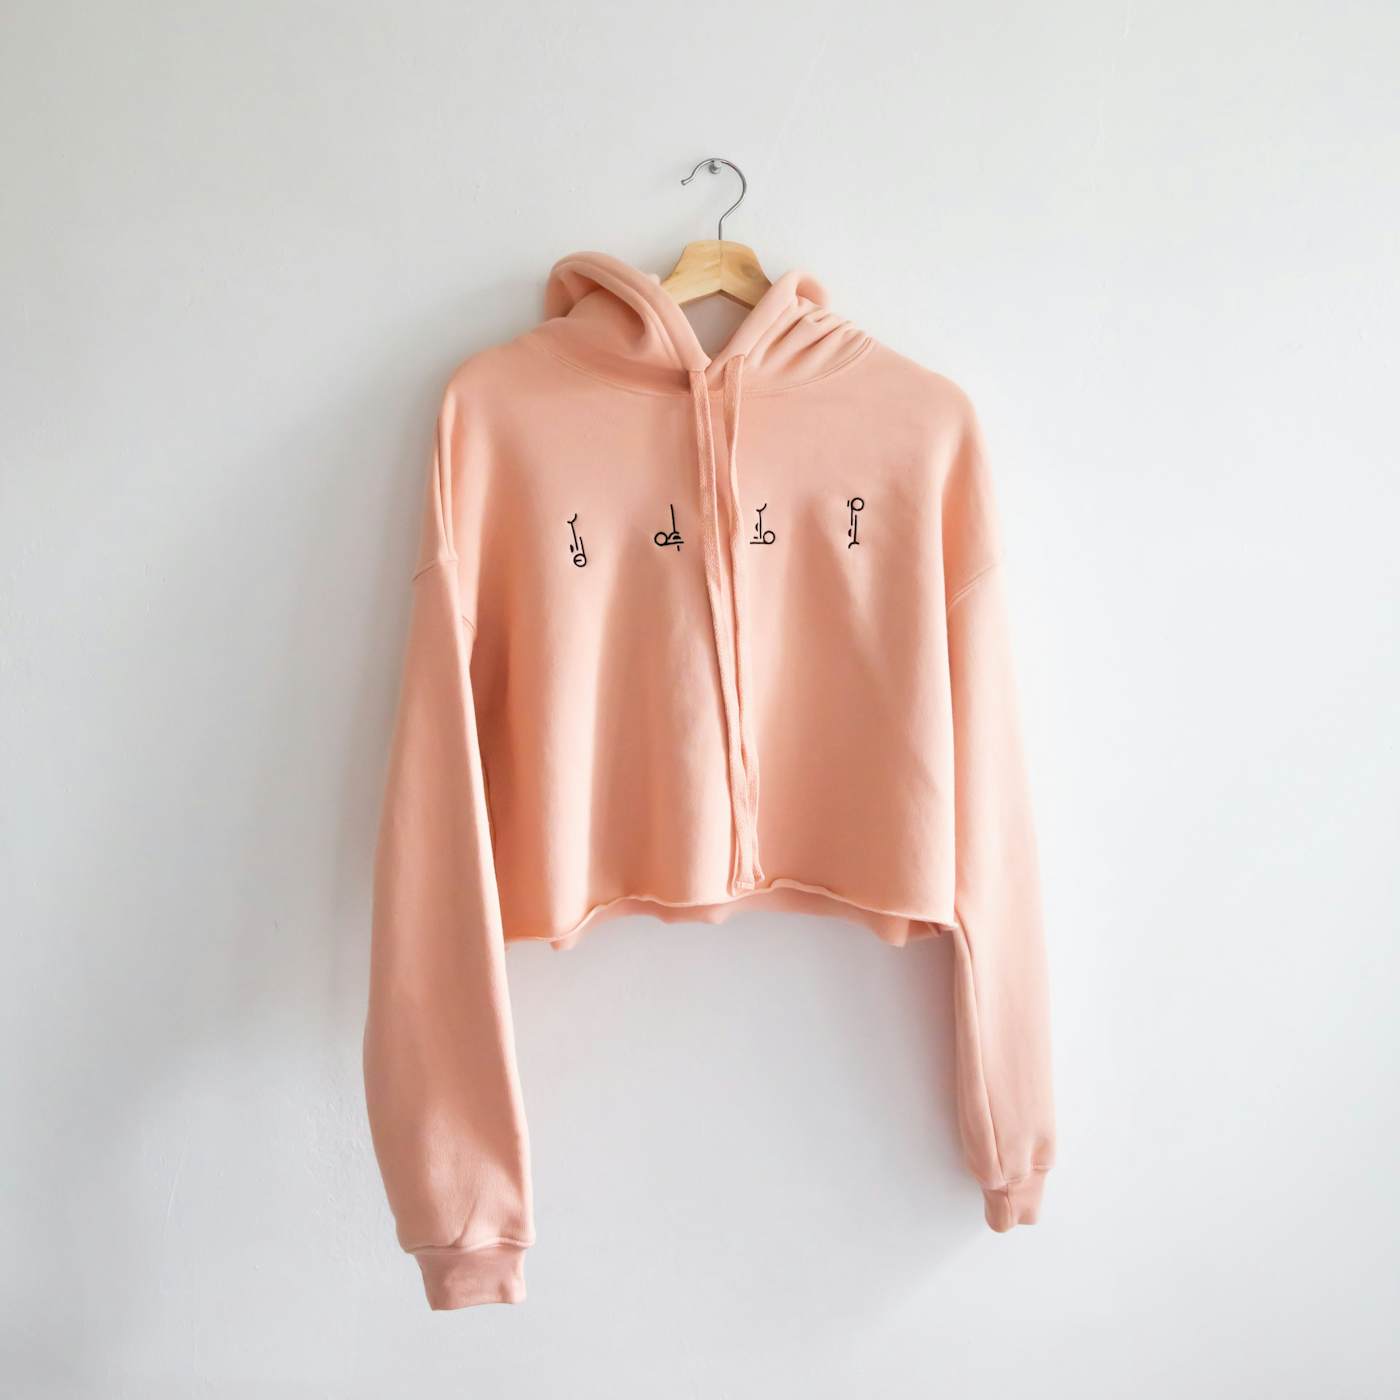 Hippo Campus CROPPED LOGOS HOODIE